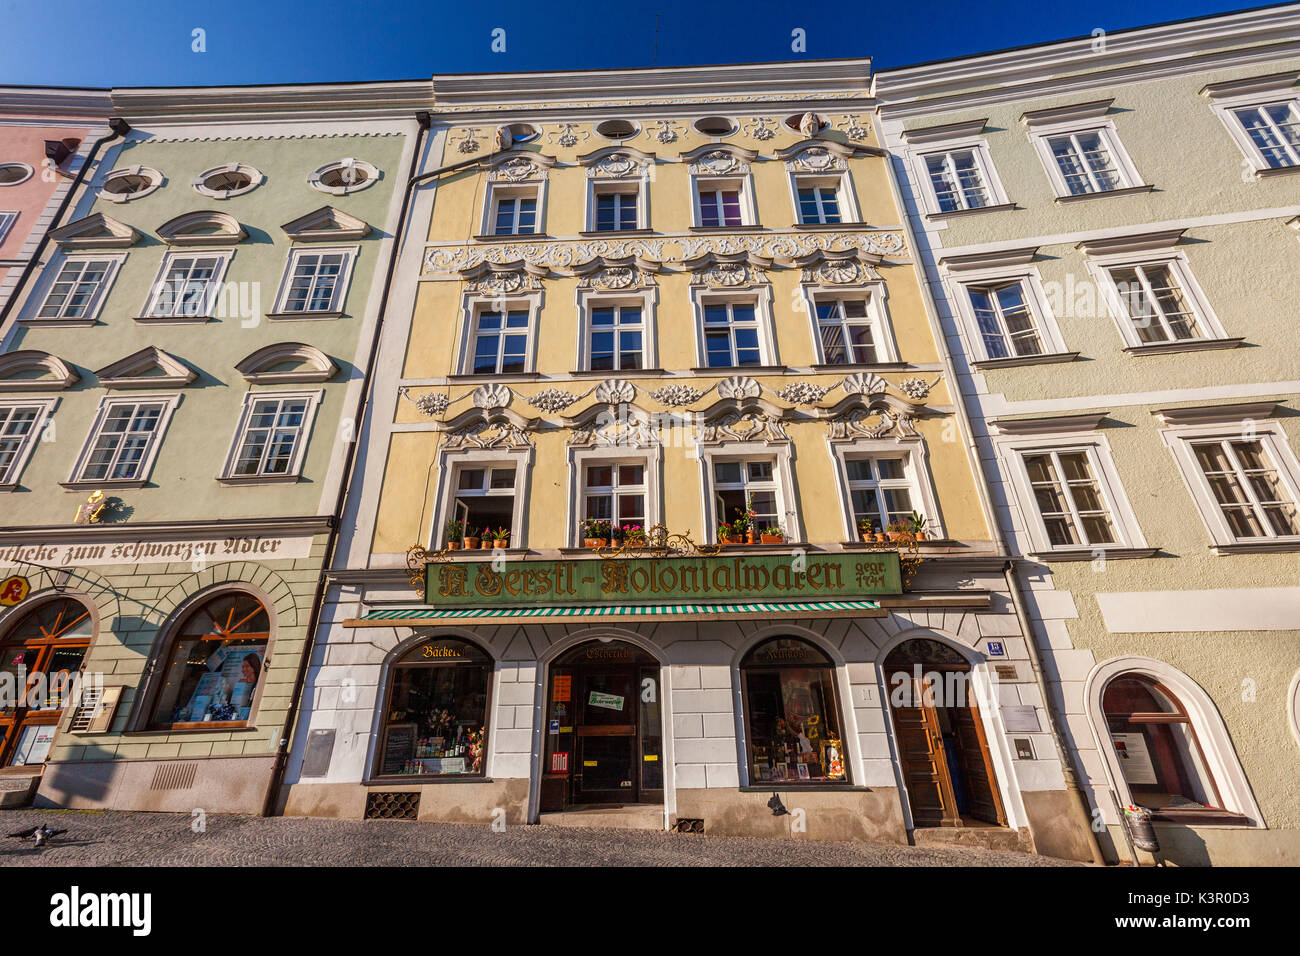 The typical architecture of colorful facades of buildings framed by blue sky Passau Lower Bavaria Germany Europe Stock Photo